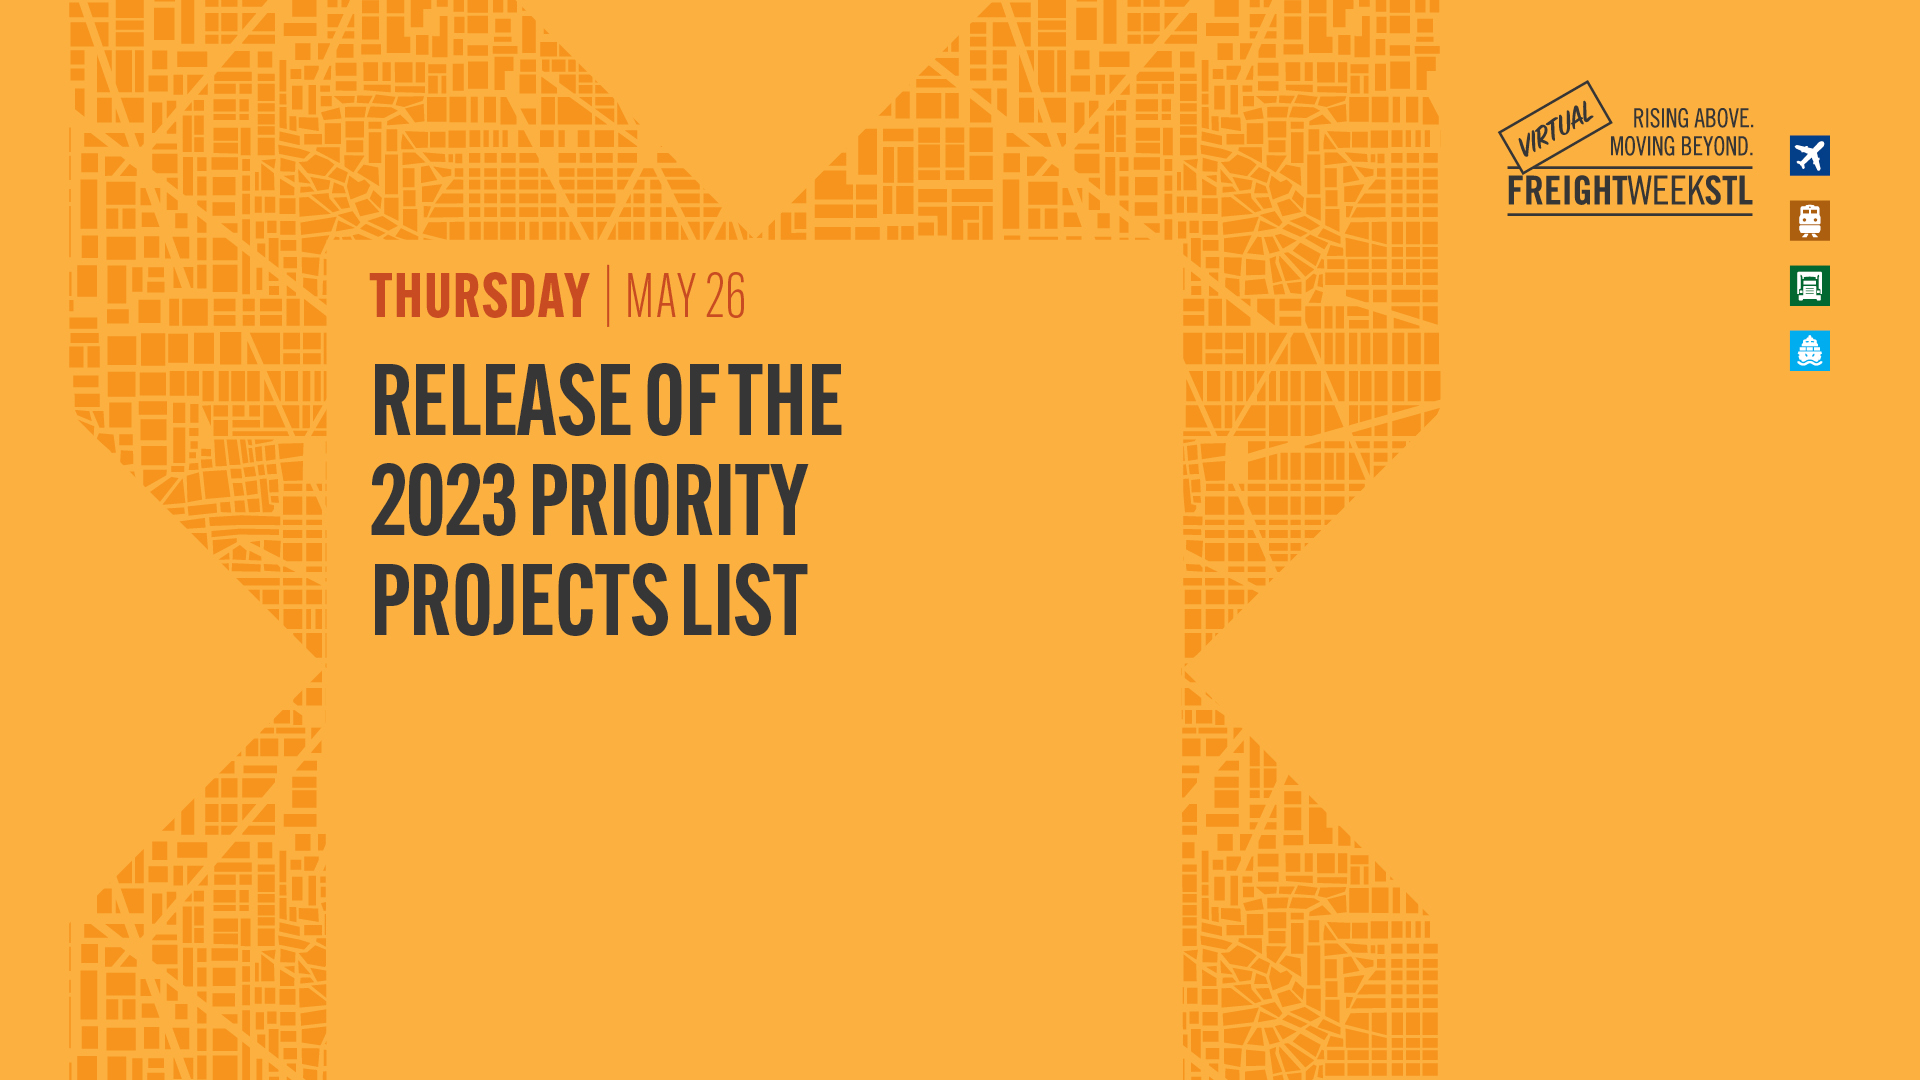 Thursday May 26 Release of the 2023 Priority Projects List